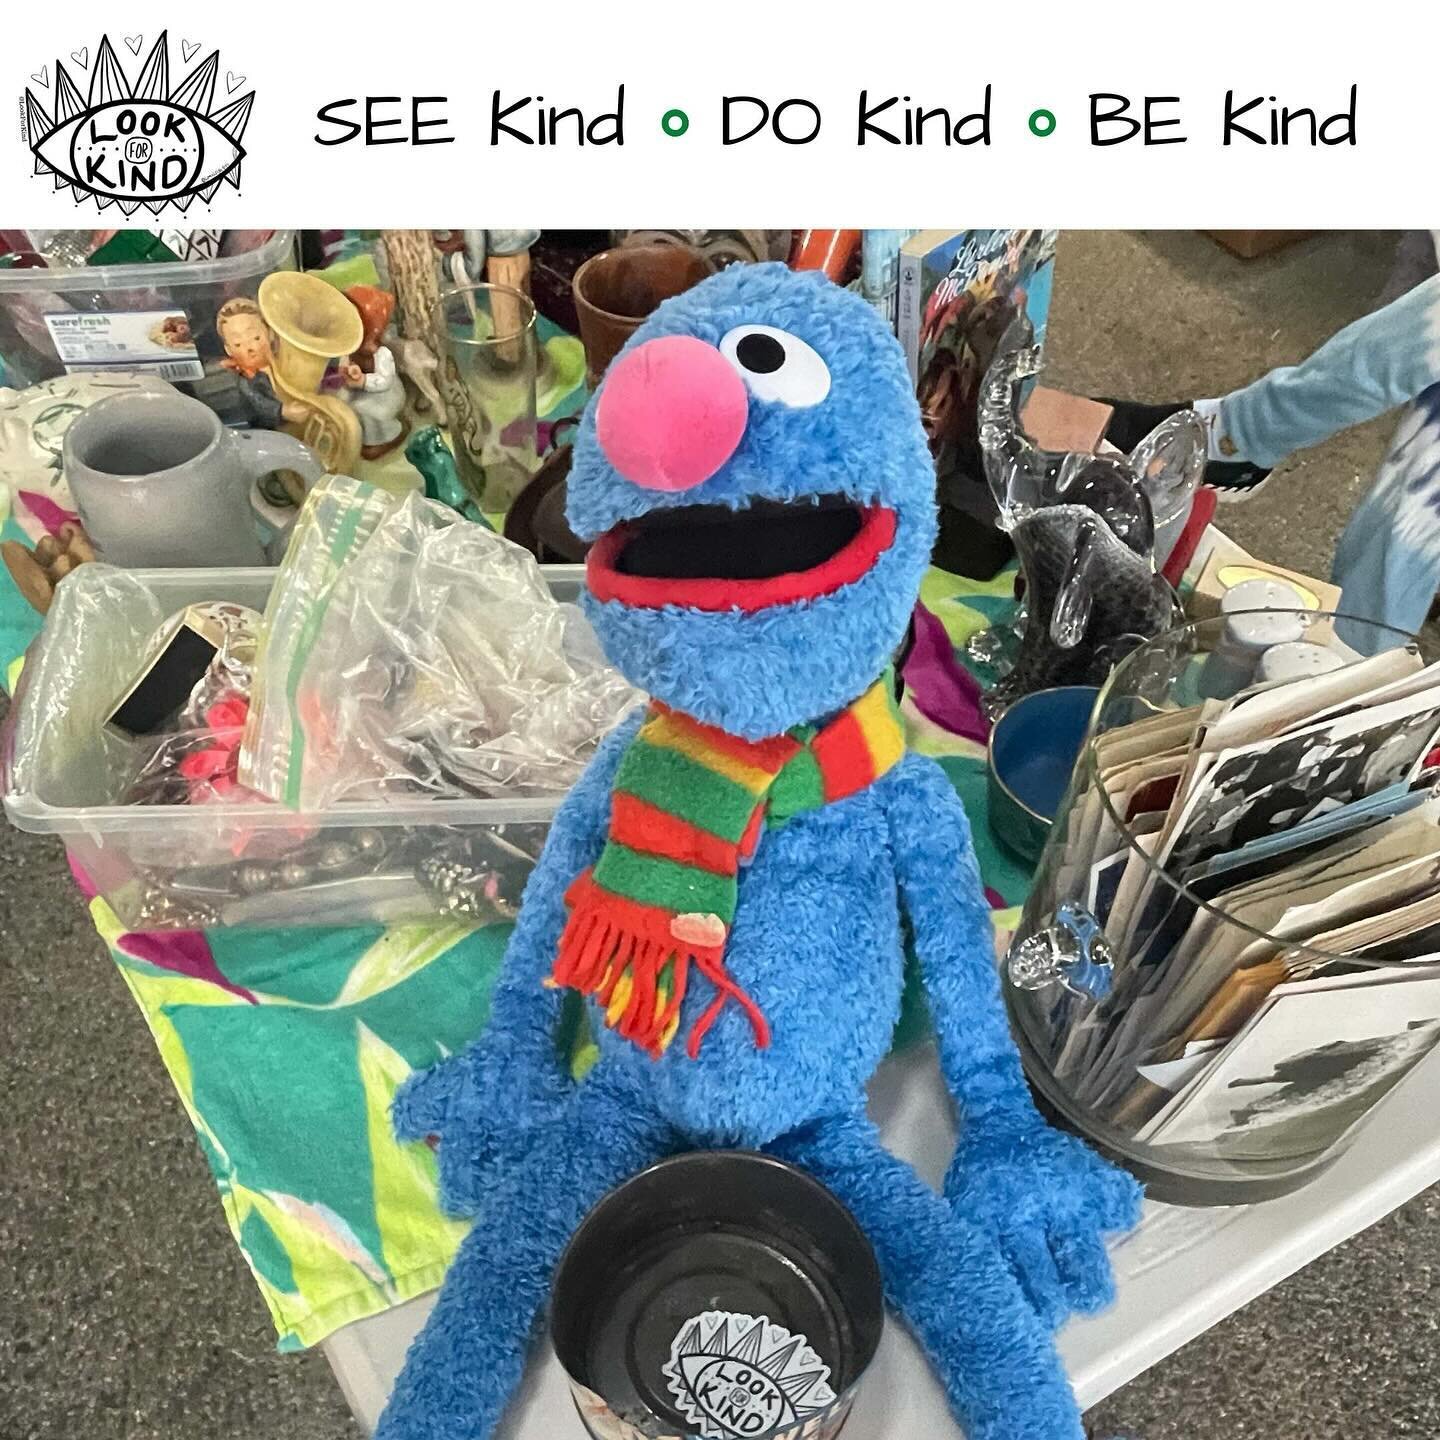 Plenty to be found when looking around.
****
SEE Kind. DO Kind. BE Kind.
****
#lookforkind 
#mentalheathmatters
#suicideprevention
#suicidehotline
#988